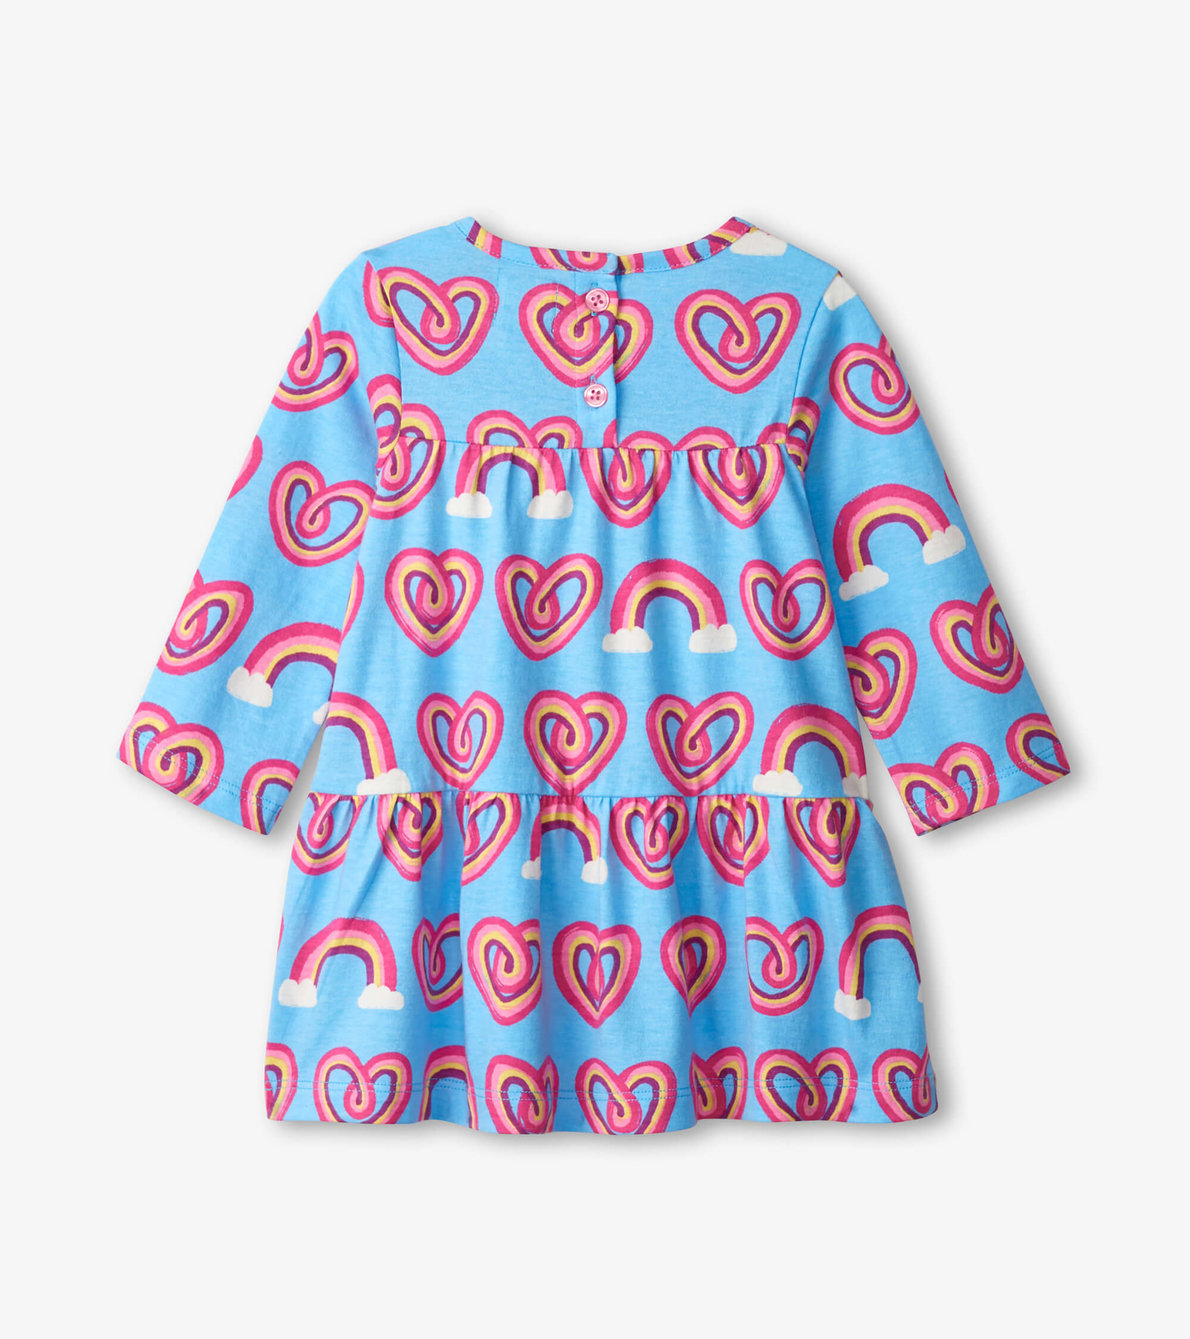 View larger image of Twisty Rainbow Hearts Baby Tiered Dress